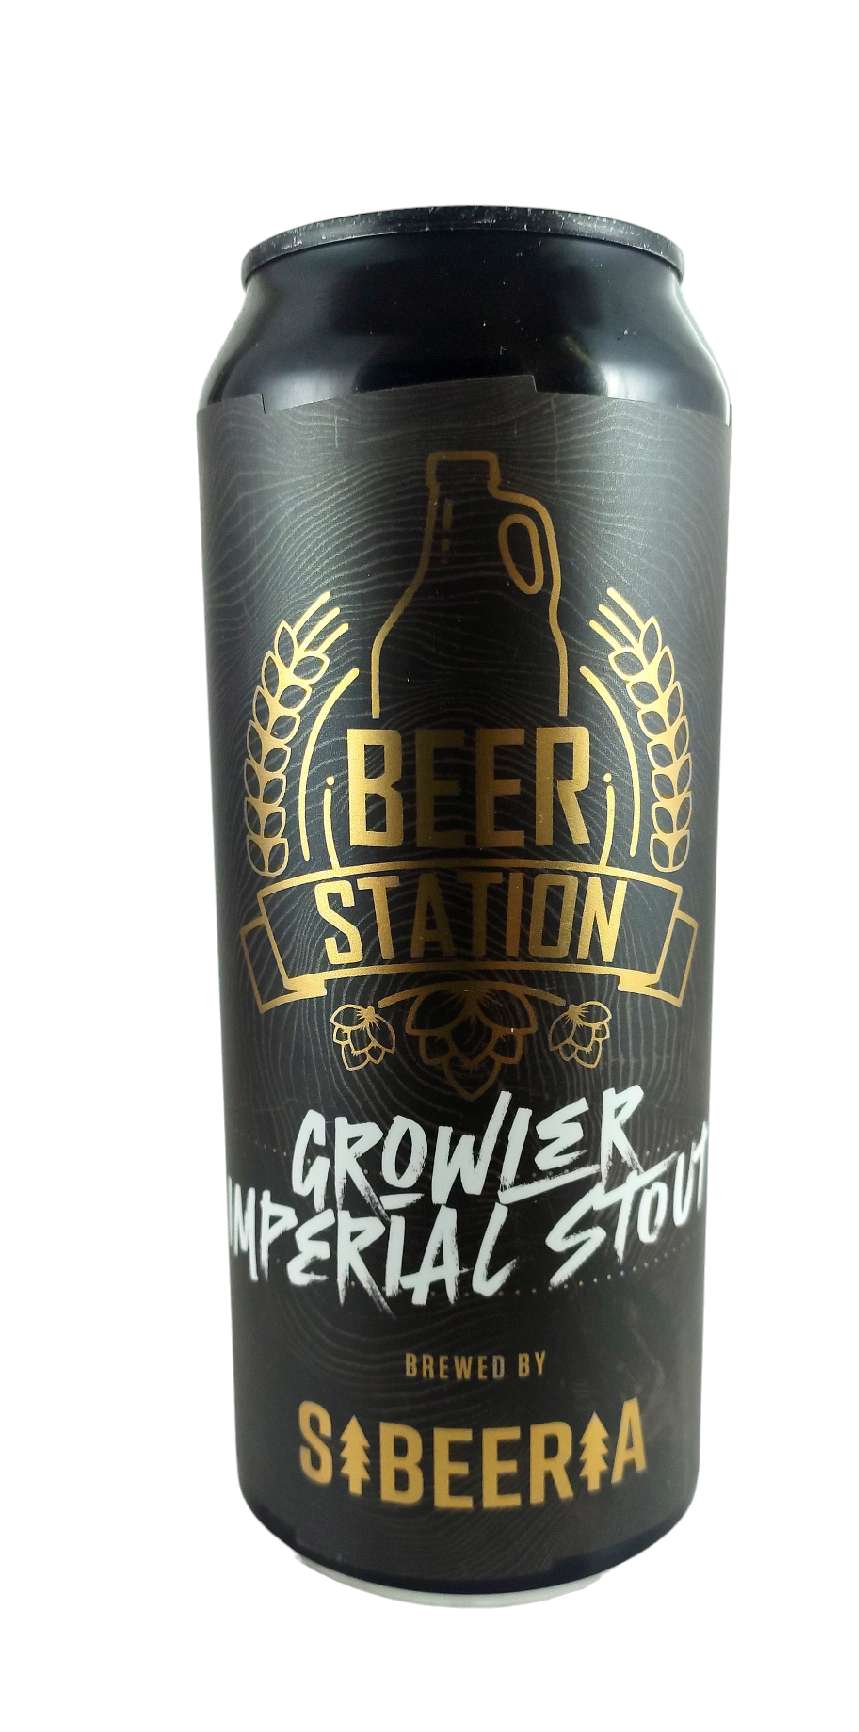 Sibeeria a Growler Imperial Stout 22° 